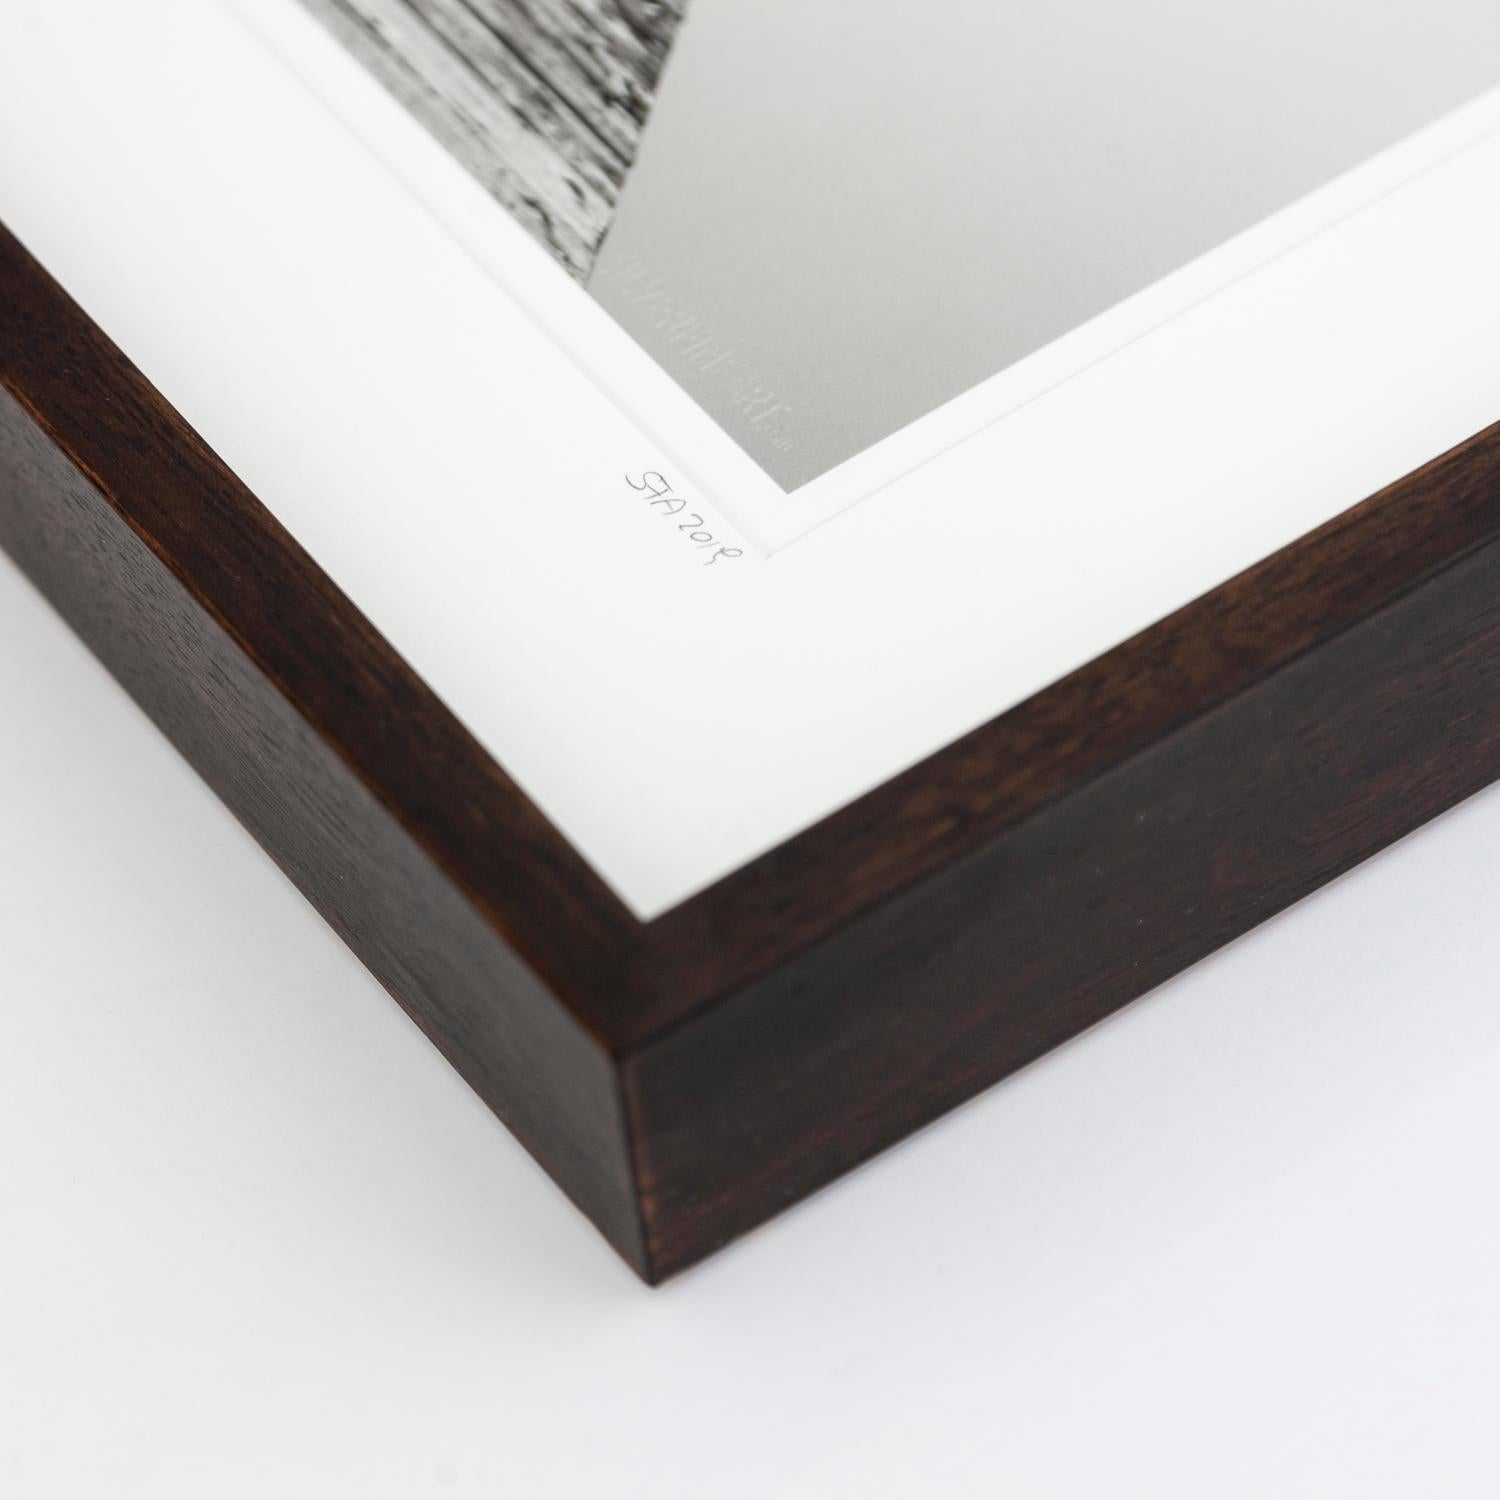 Gerald Berghammer - Limited Edition 3/20
Silver Gelatin Prints, Selenium Toned, Printed 2019
Signed, numbered, dated by Artis.
Handmade wood frame, dark-brown, natural white archival Passepartout, anti-reflection white glass, UV 70, metal corners